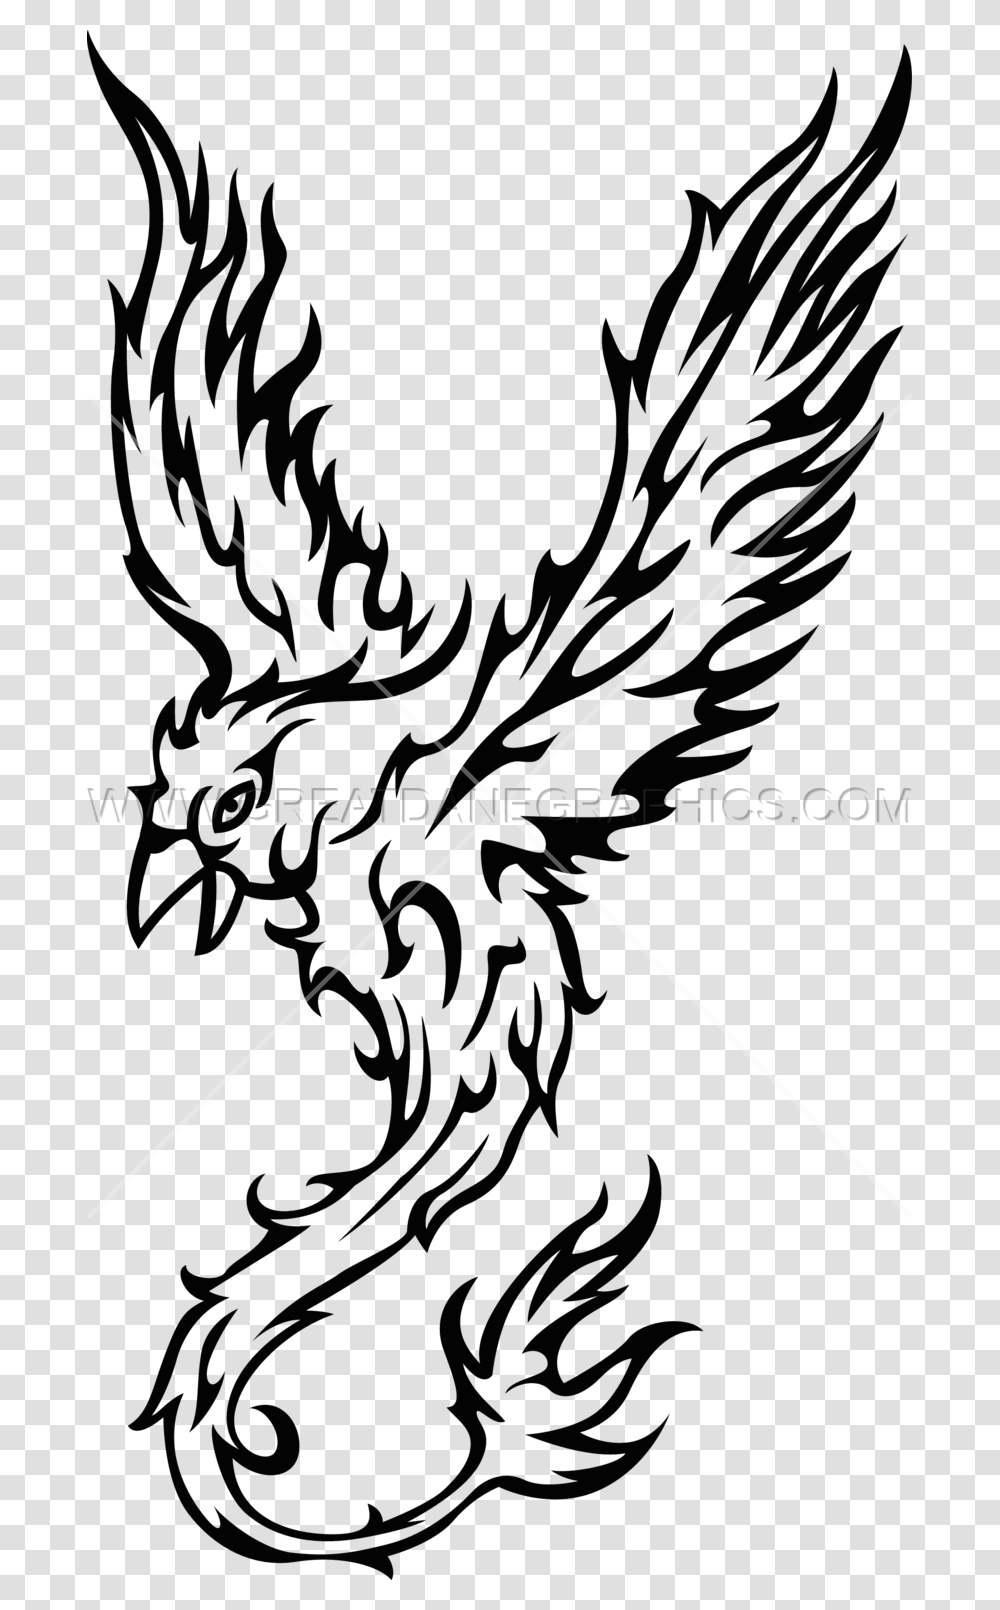 Phoenix Production Ready Artwork For T Shirt Printing, Floral Design, Pattern Transparent Png